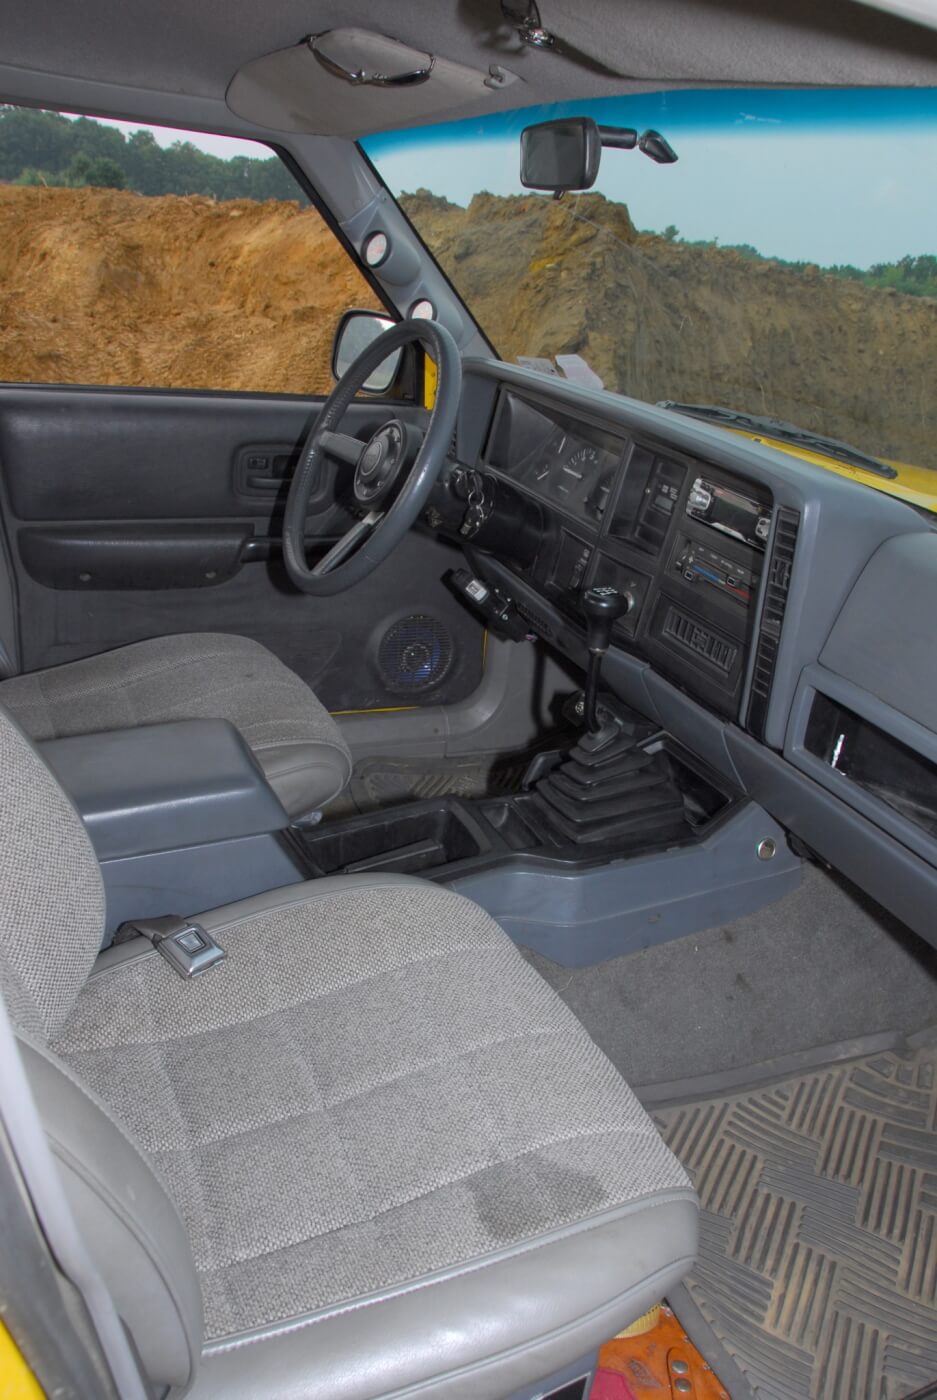 Most of the interior comes from a Cherokee. The center console had to be modified to fit the NV-4500 shifter, which comes through the floor several inches forward of where the stock manual shifter would have been. Bankston relocated the parking brake lever from the floor to the console position.